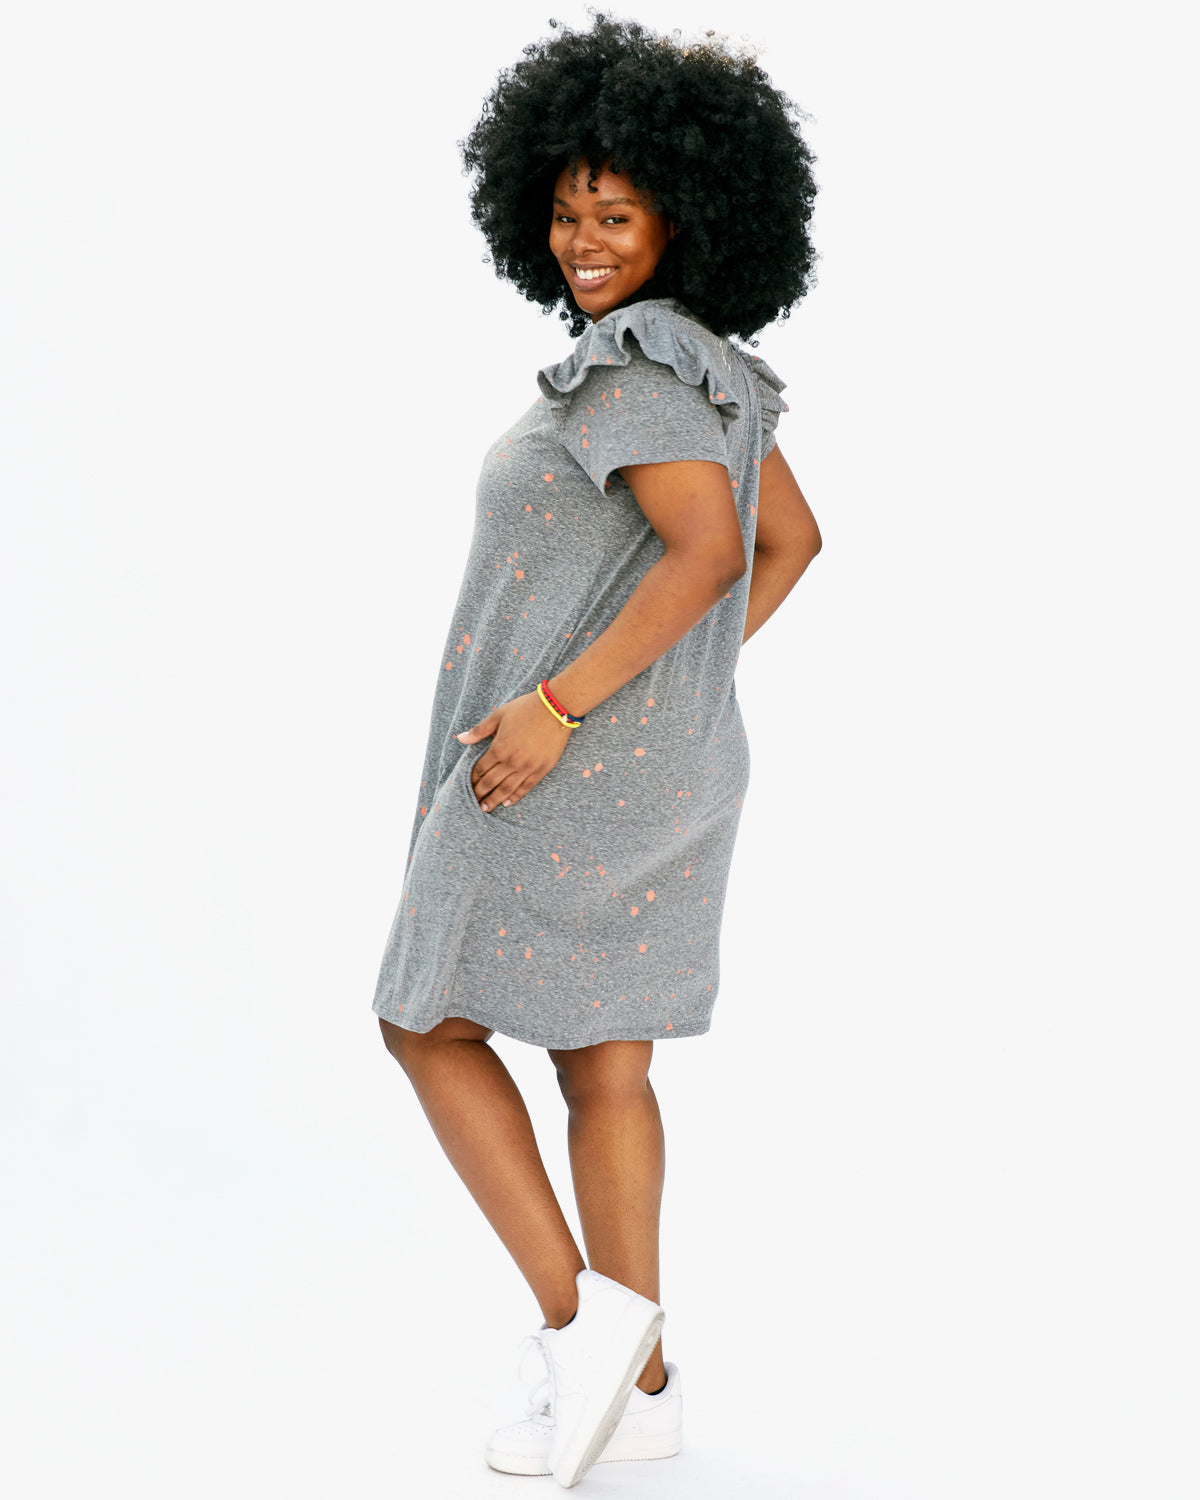 Candace with her Hands in the Pockets of the Grey w/ Salmon Splash Ruffle Dress